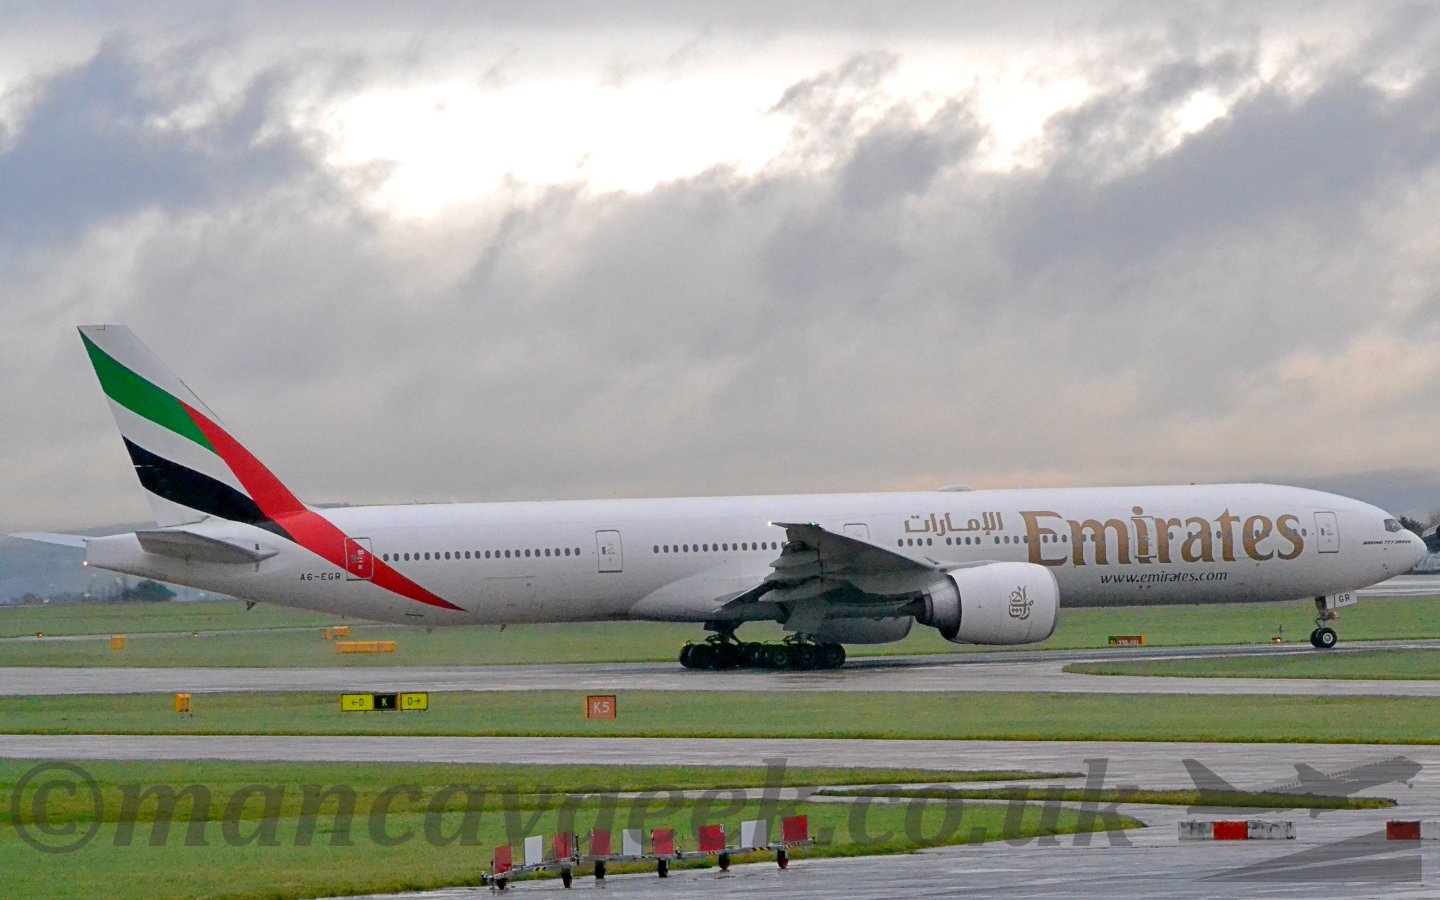 Side view of a twin engined jet airliner moving from left to right. The plane is mostly white, with large golden billboard-style "Emirates" titles in English on the forward fuselage, just ahead of smaller golden tiles in an Arabic script. There is a red line running up from the rear fuselage in to the tail, with green, white, and black stripes coming off it and running across the tail, suggesting the flag of the United Arab Emirates. Large grassed areas crossed by taxiways make up the foreground, with more grass in the background, all under a dramatically grey sky with golden sunlight bursting through at the top.